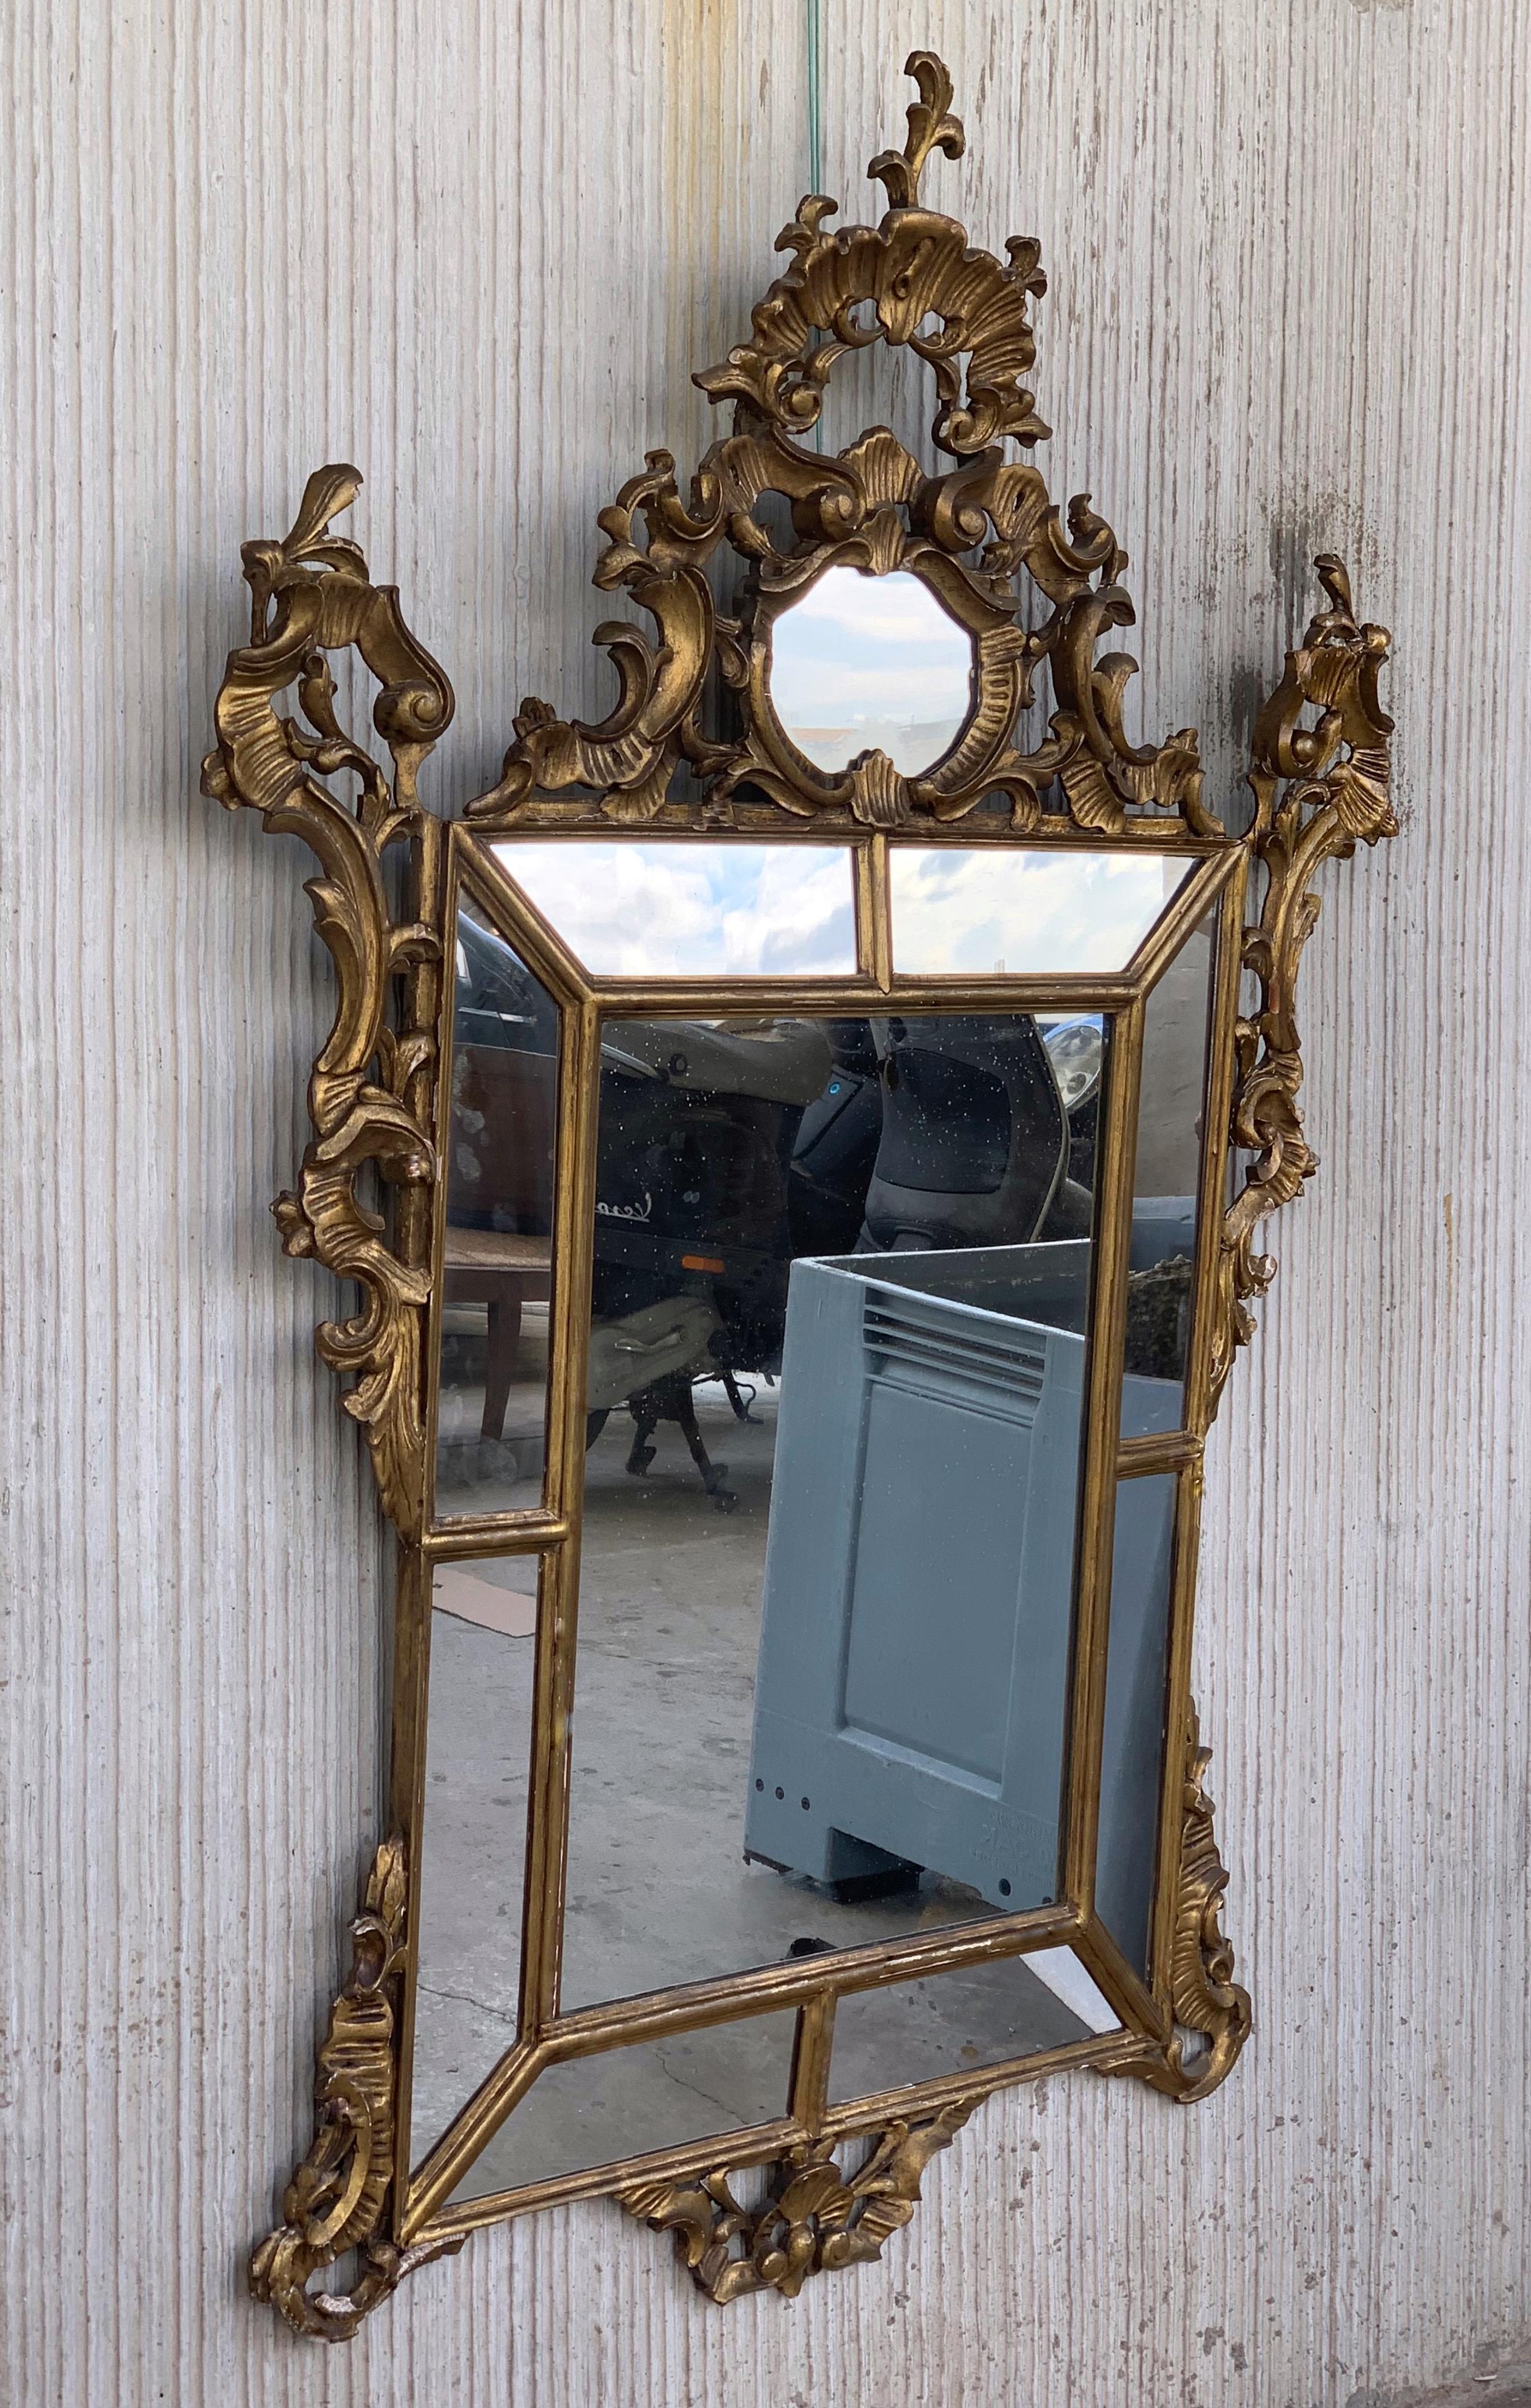 Regency 19th Century French Empire Period Carved Giltwood Rectangular Mirror with Crest